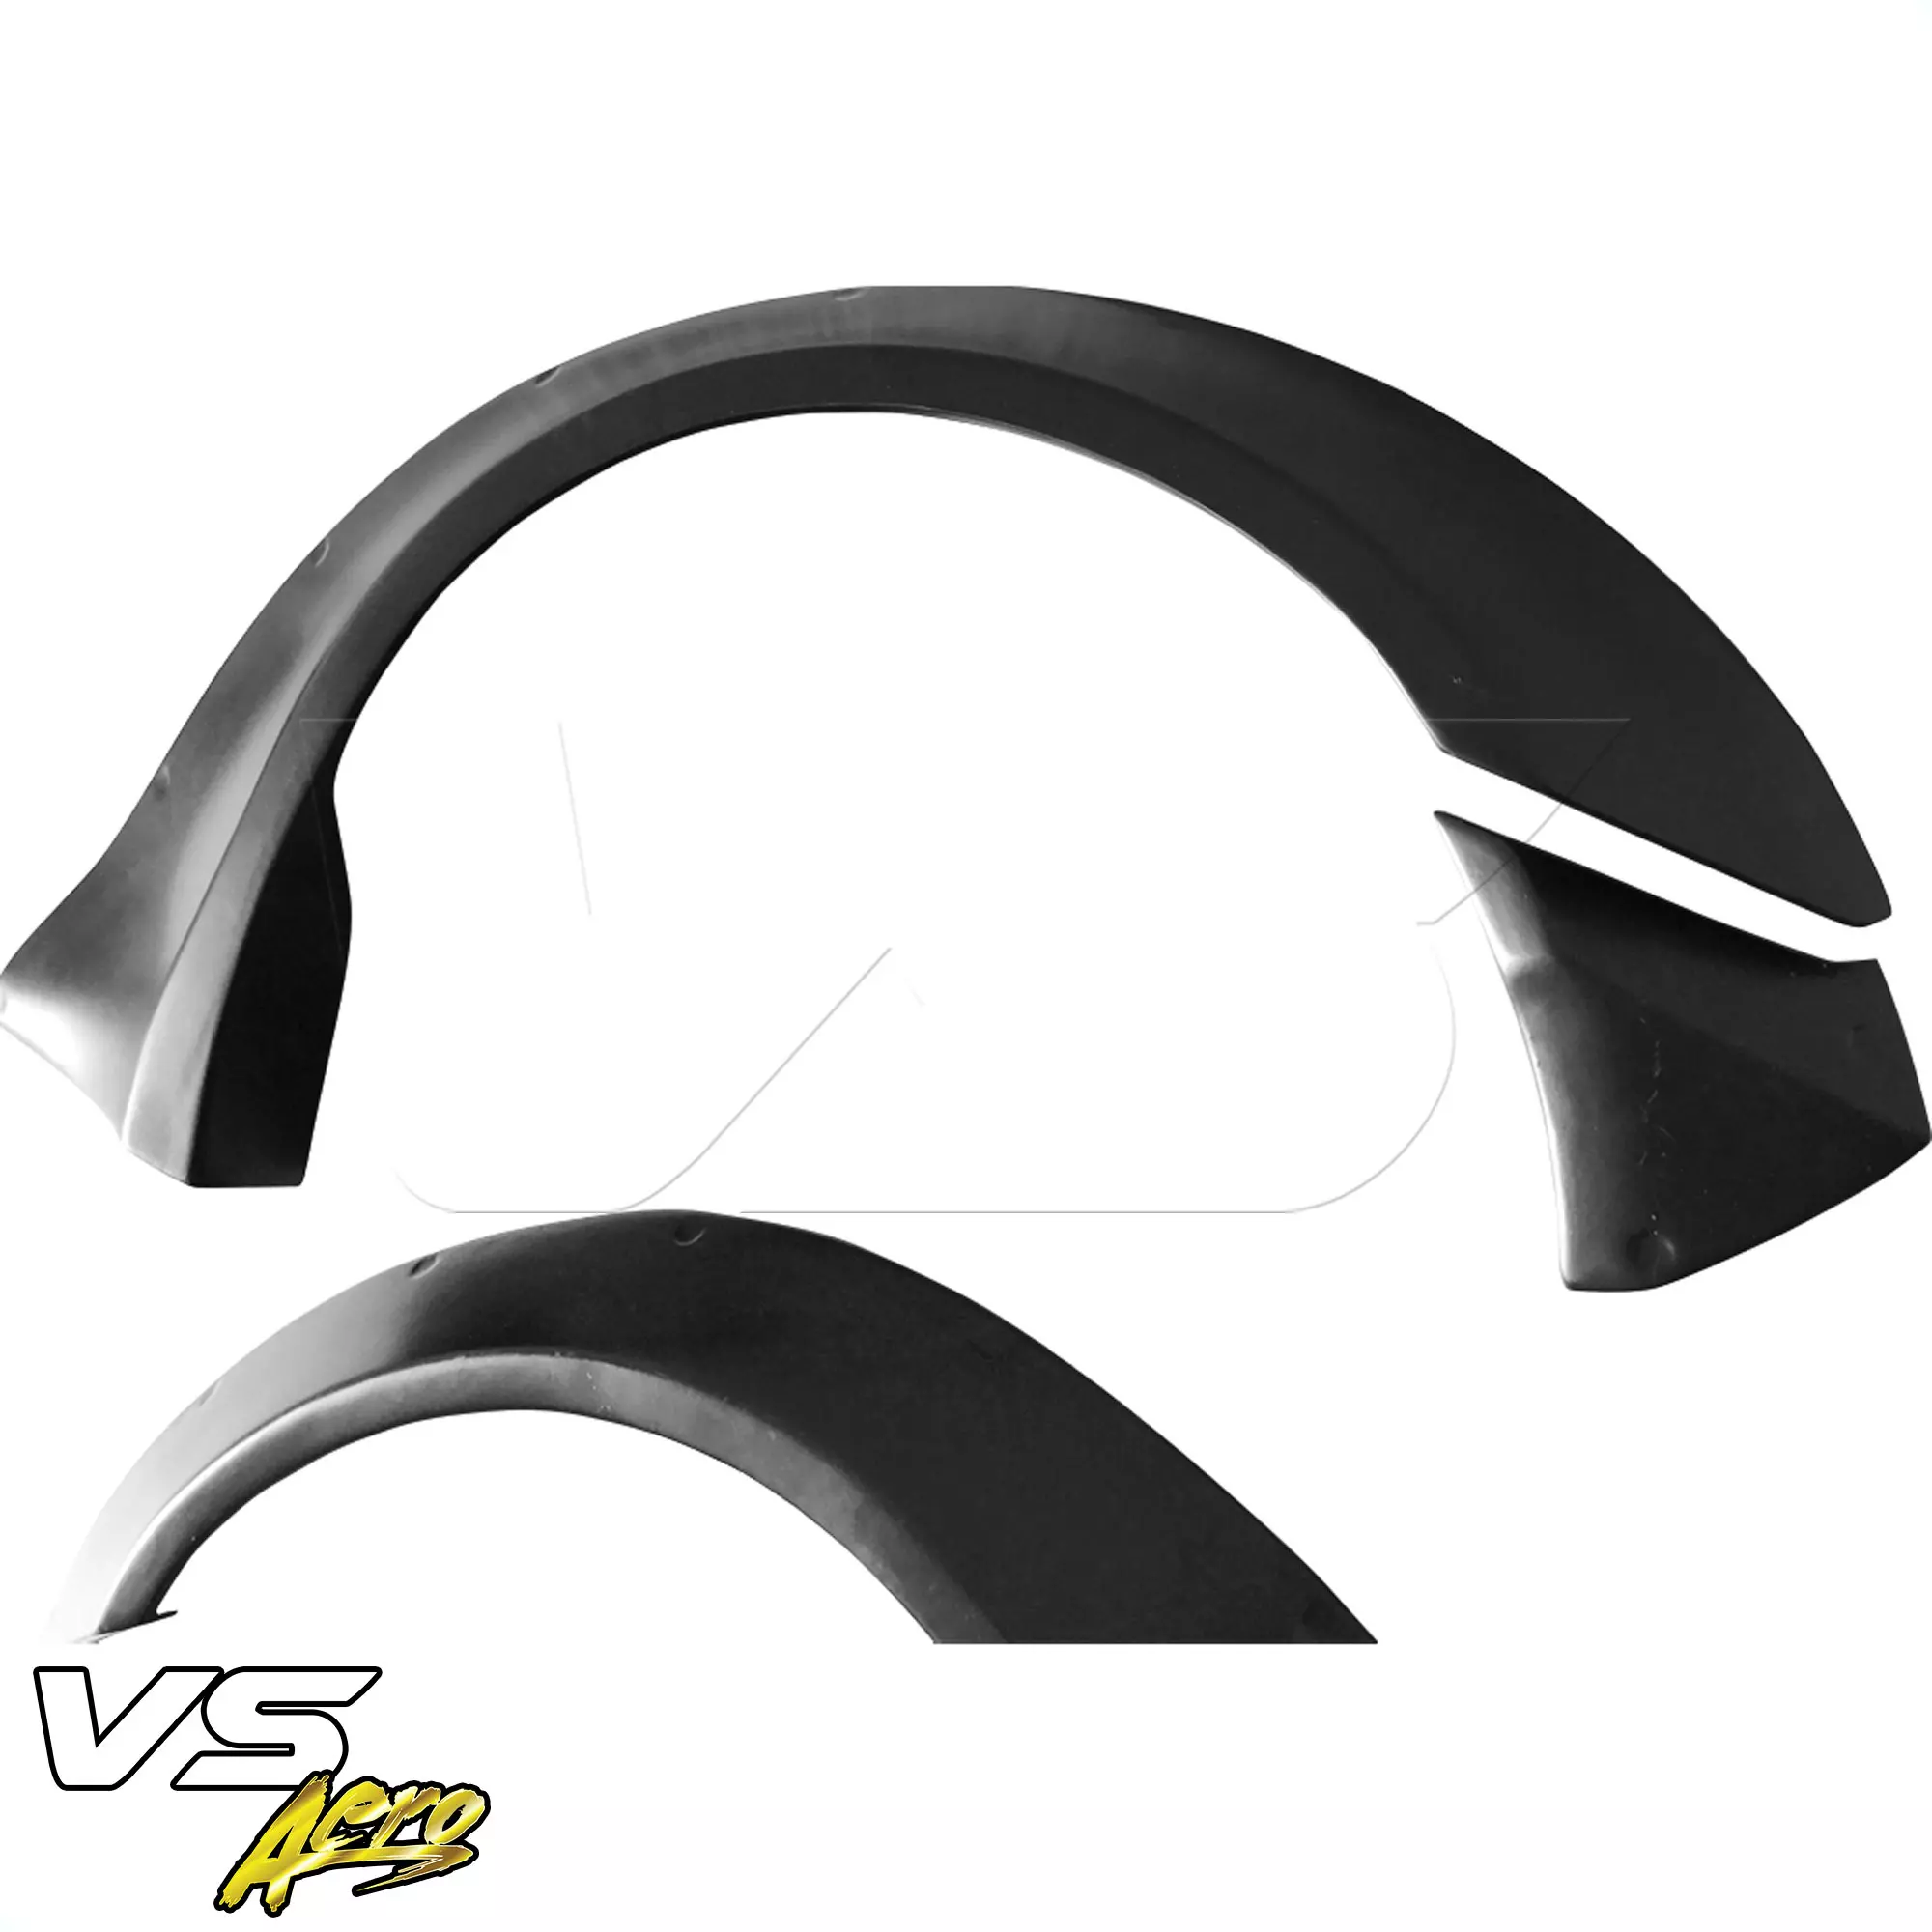 VSaero FRP LBPE Wide Body Fender Flares (front) 4pc > Infiniti G37 Coupe 2008-2015 > 2dr Coupe - Image 26